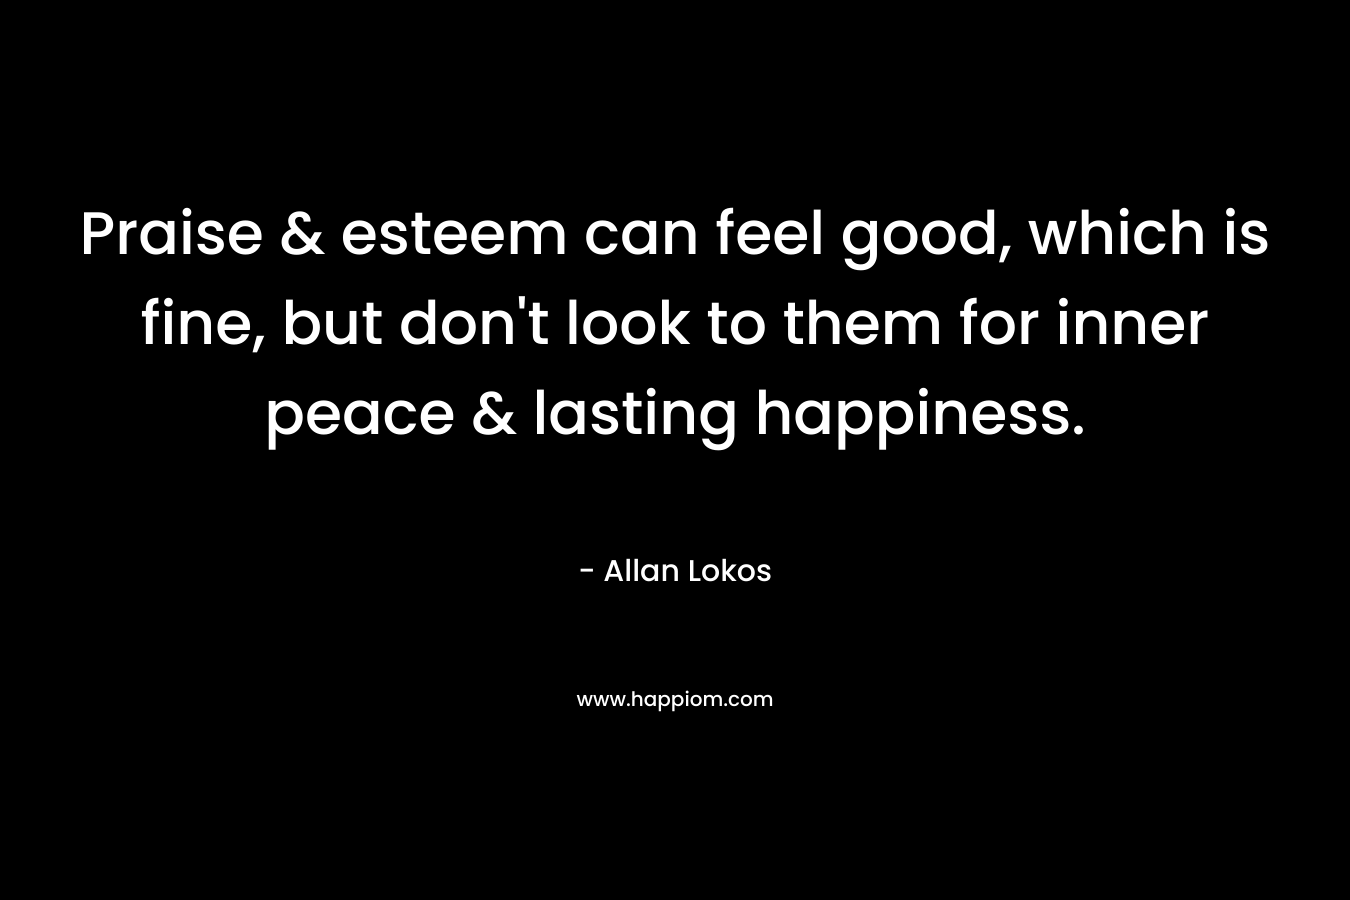 Praise & esteem can feel good, which is fine, but don't look to them for inner peace & lasting happiness.